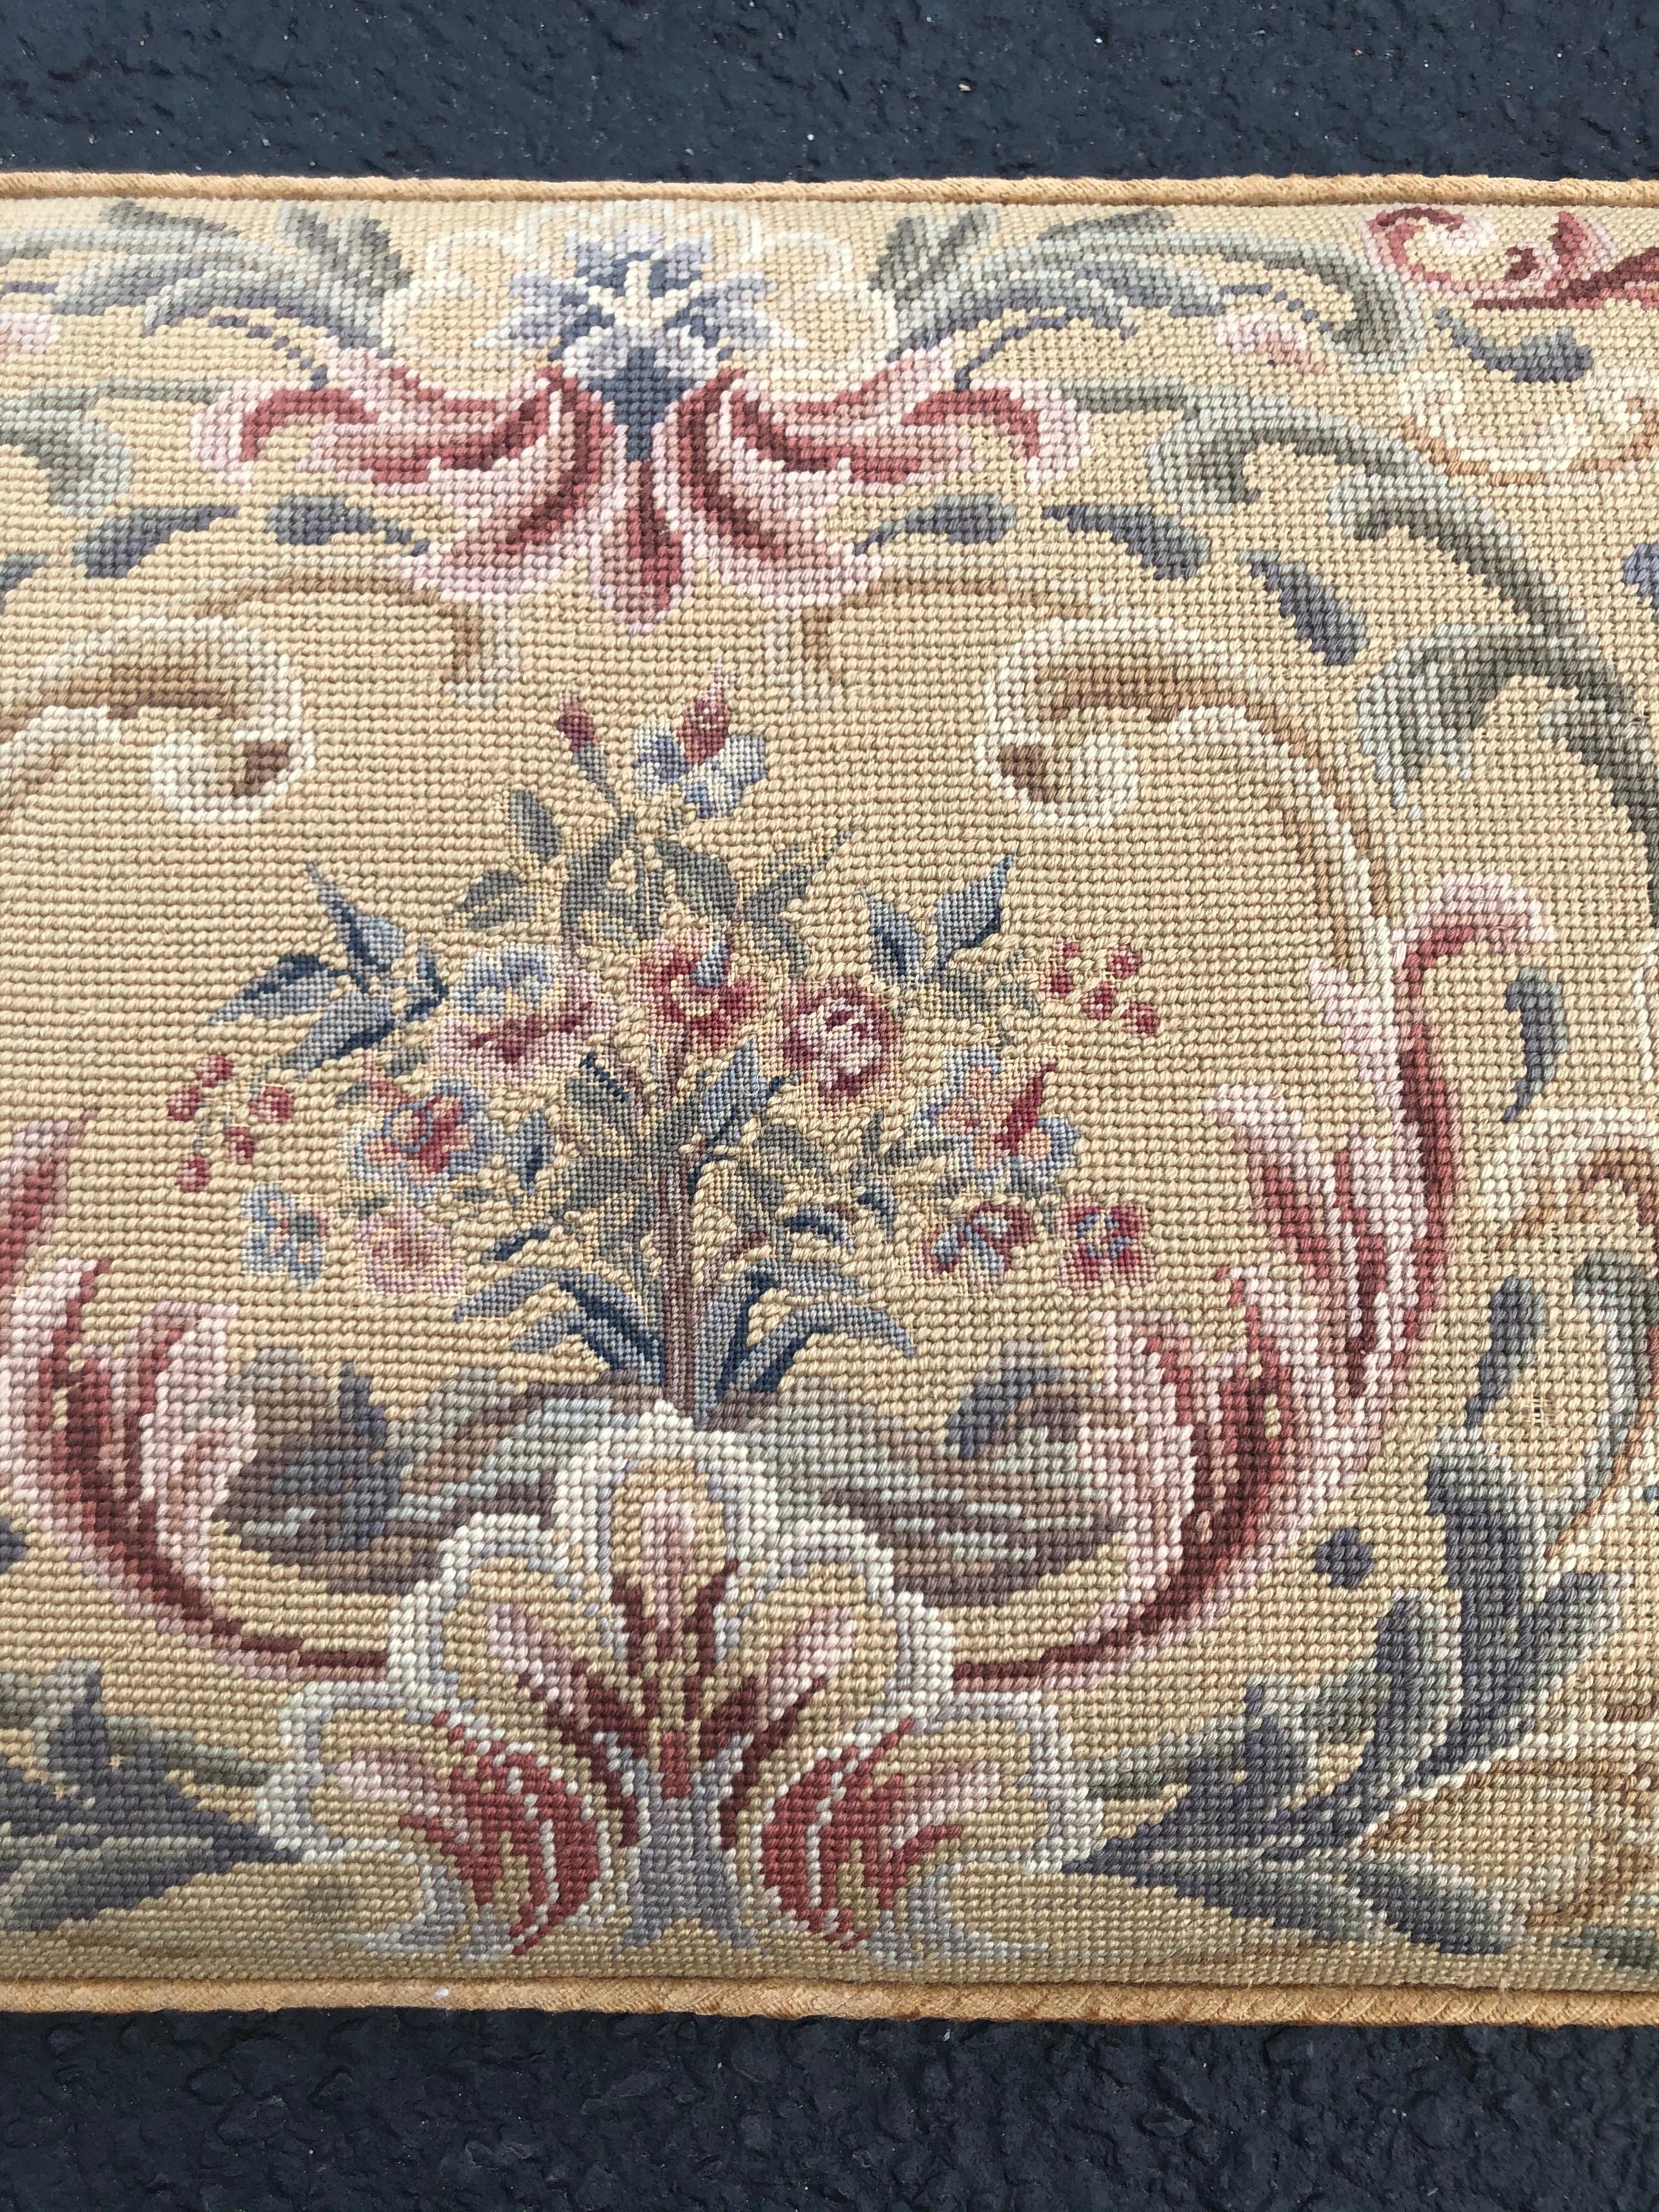 Vintage Needlepoint Upholstery Wall Hanging  4